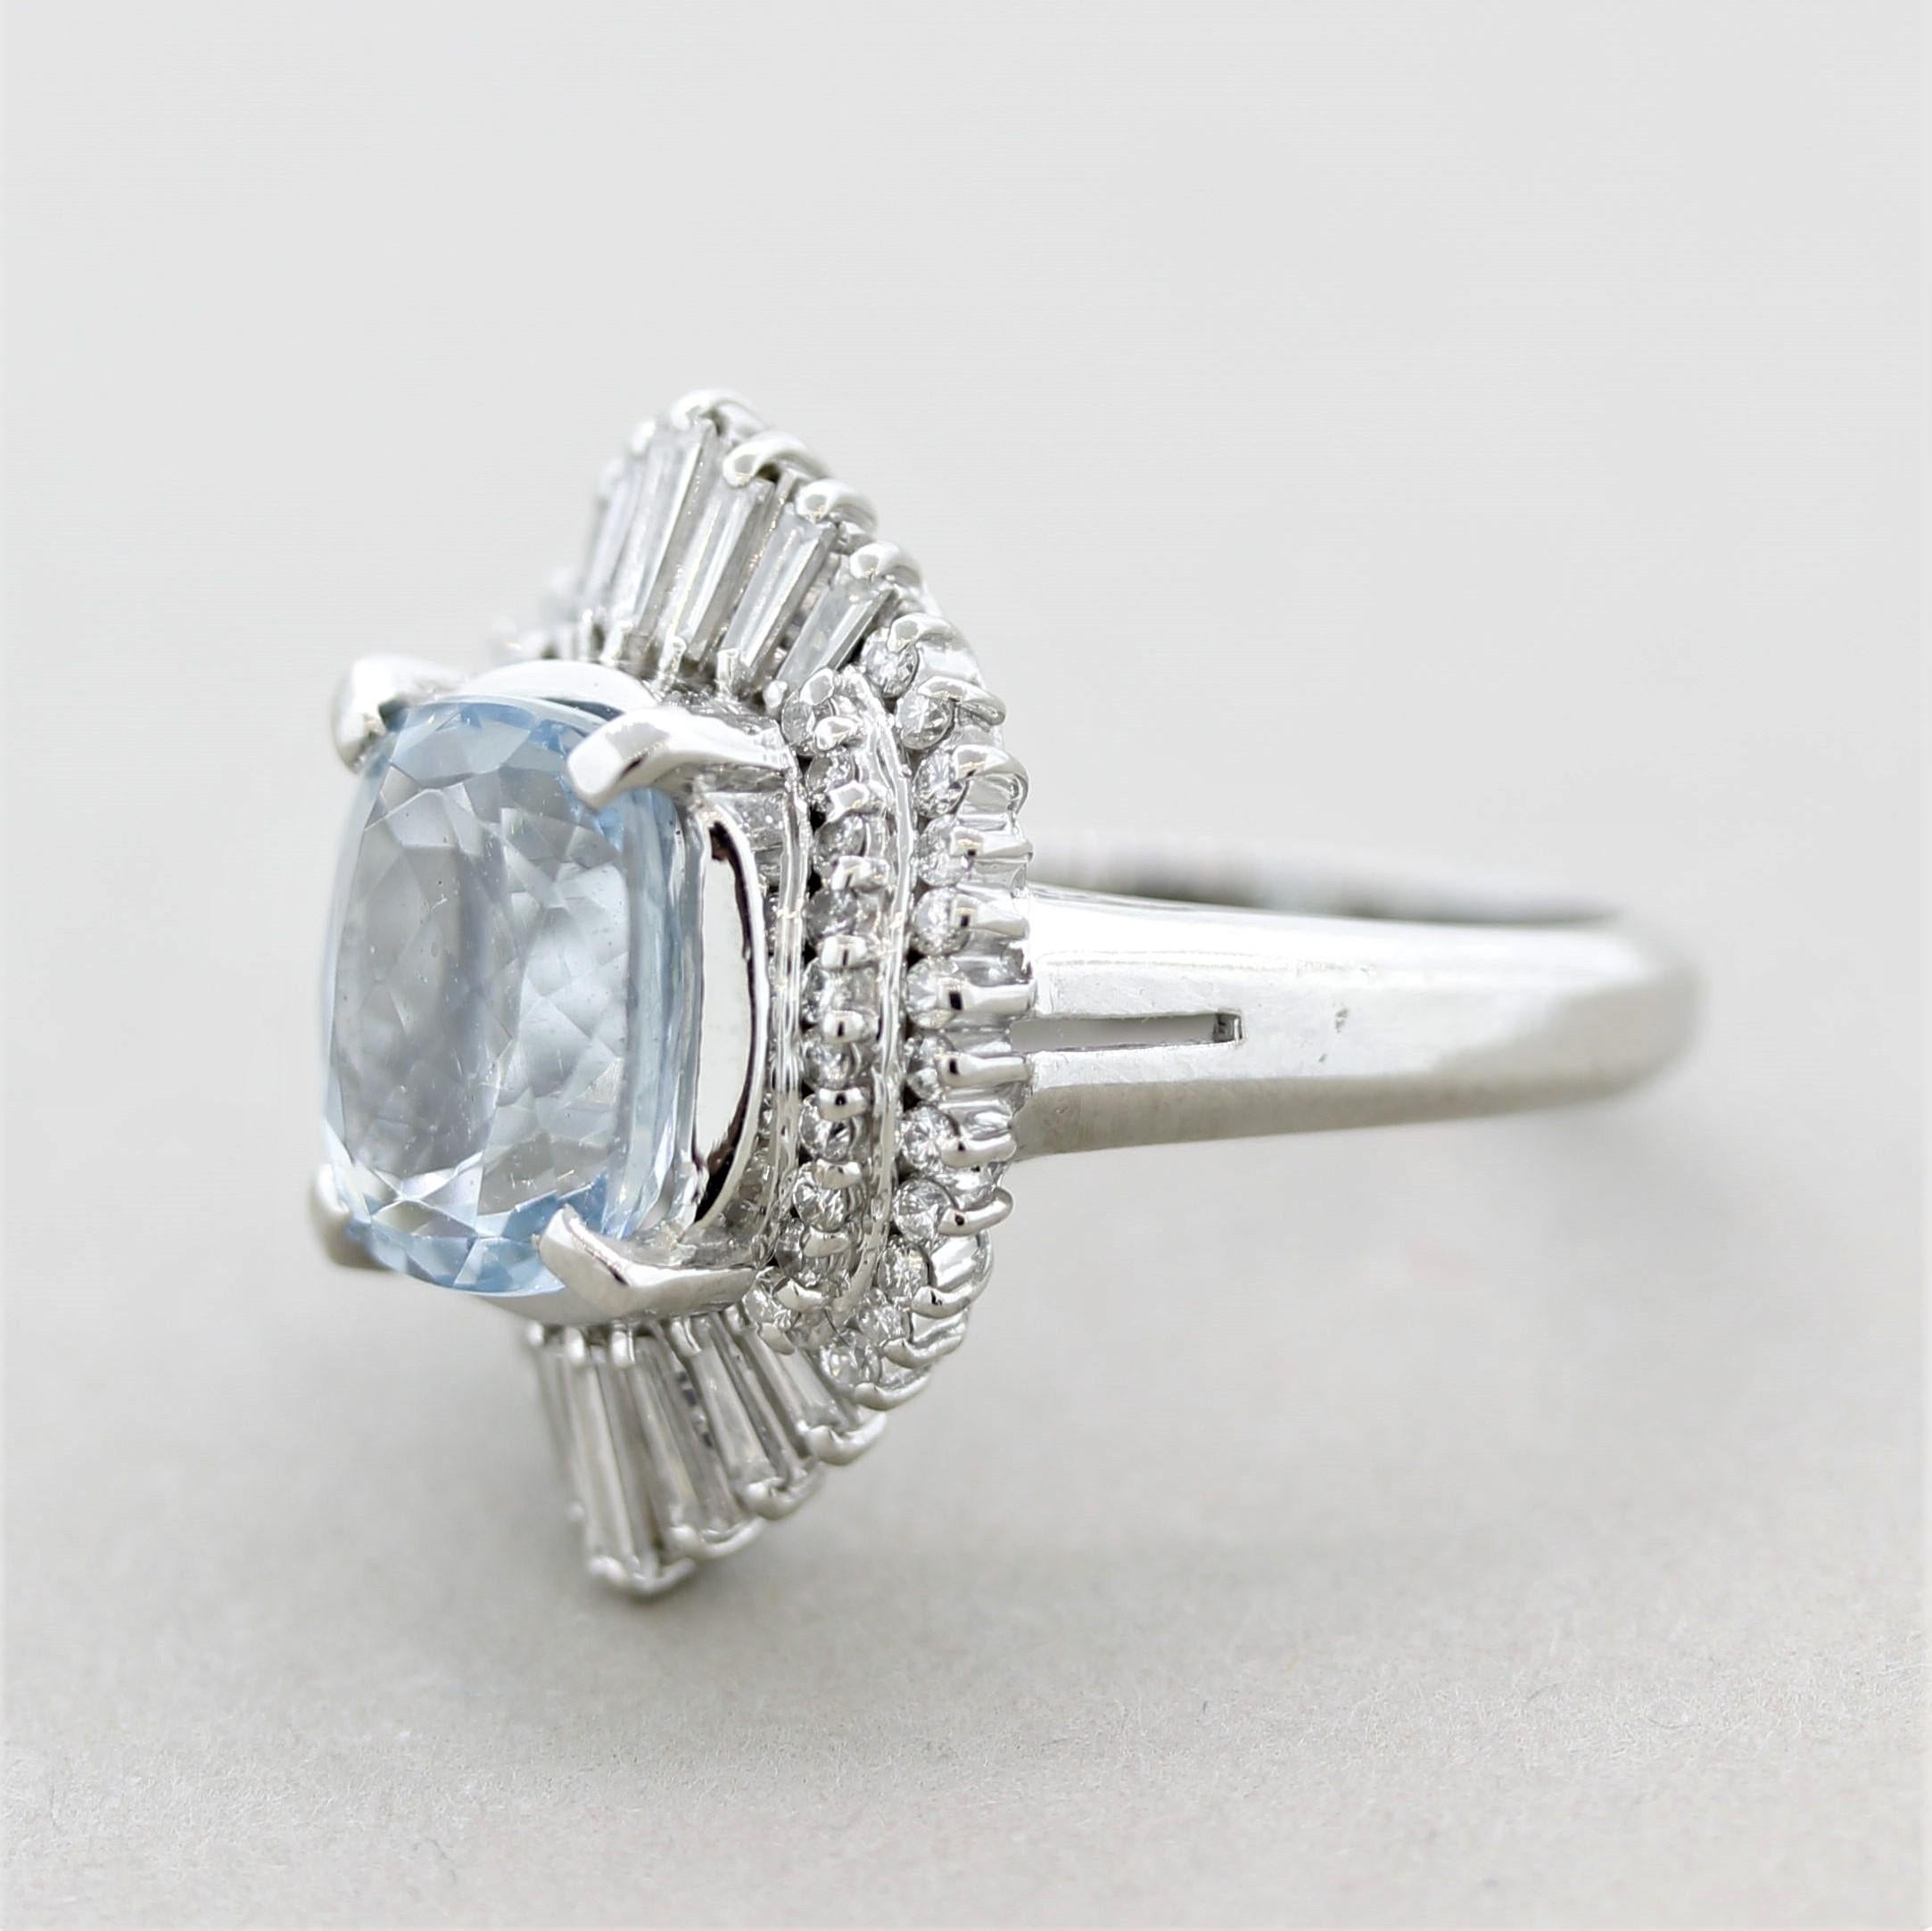 A sweet aquamarine and diamond ring! It features a 3.28 carat cushion-shaped aquamarine with a bright and lively sea-blue color. It is accented by 0.77 carats of round brilliant-cut and baguette-cut diamonds which are set around the aqua in a